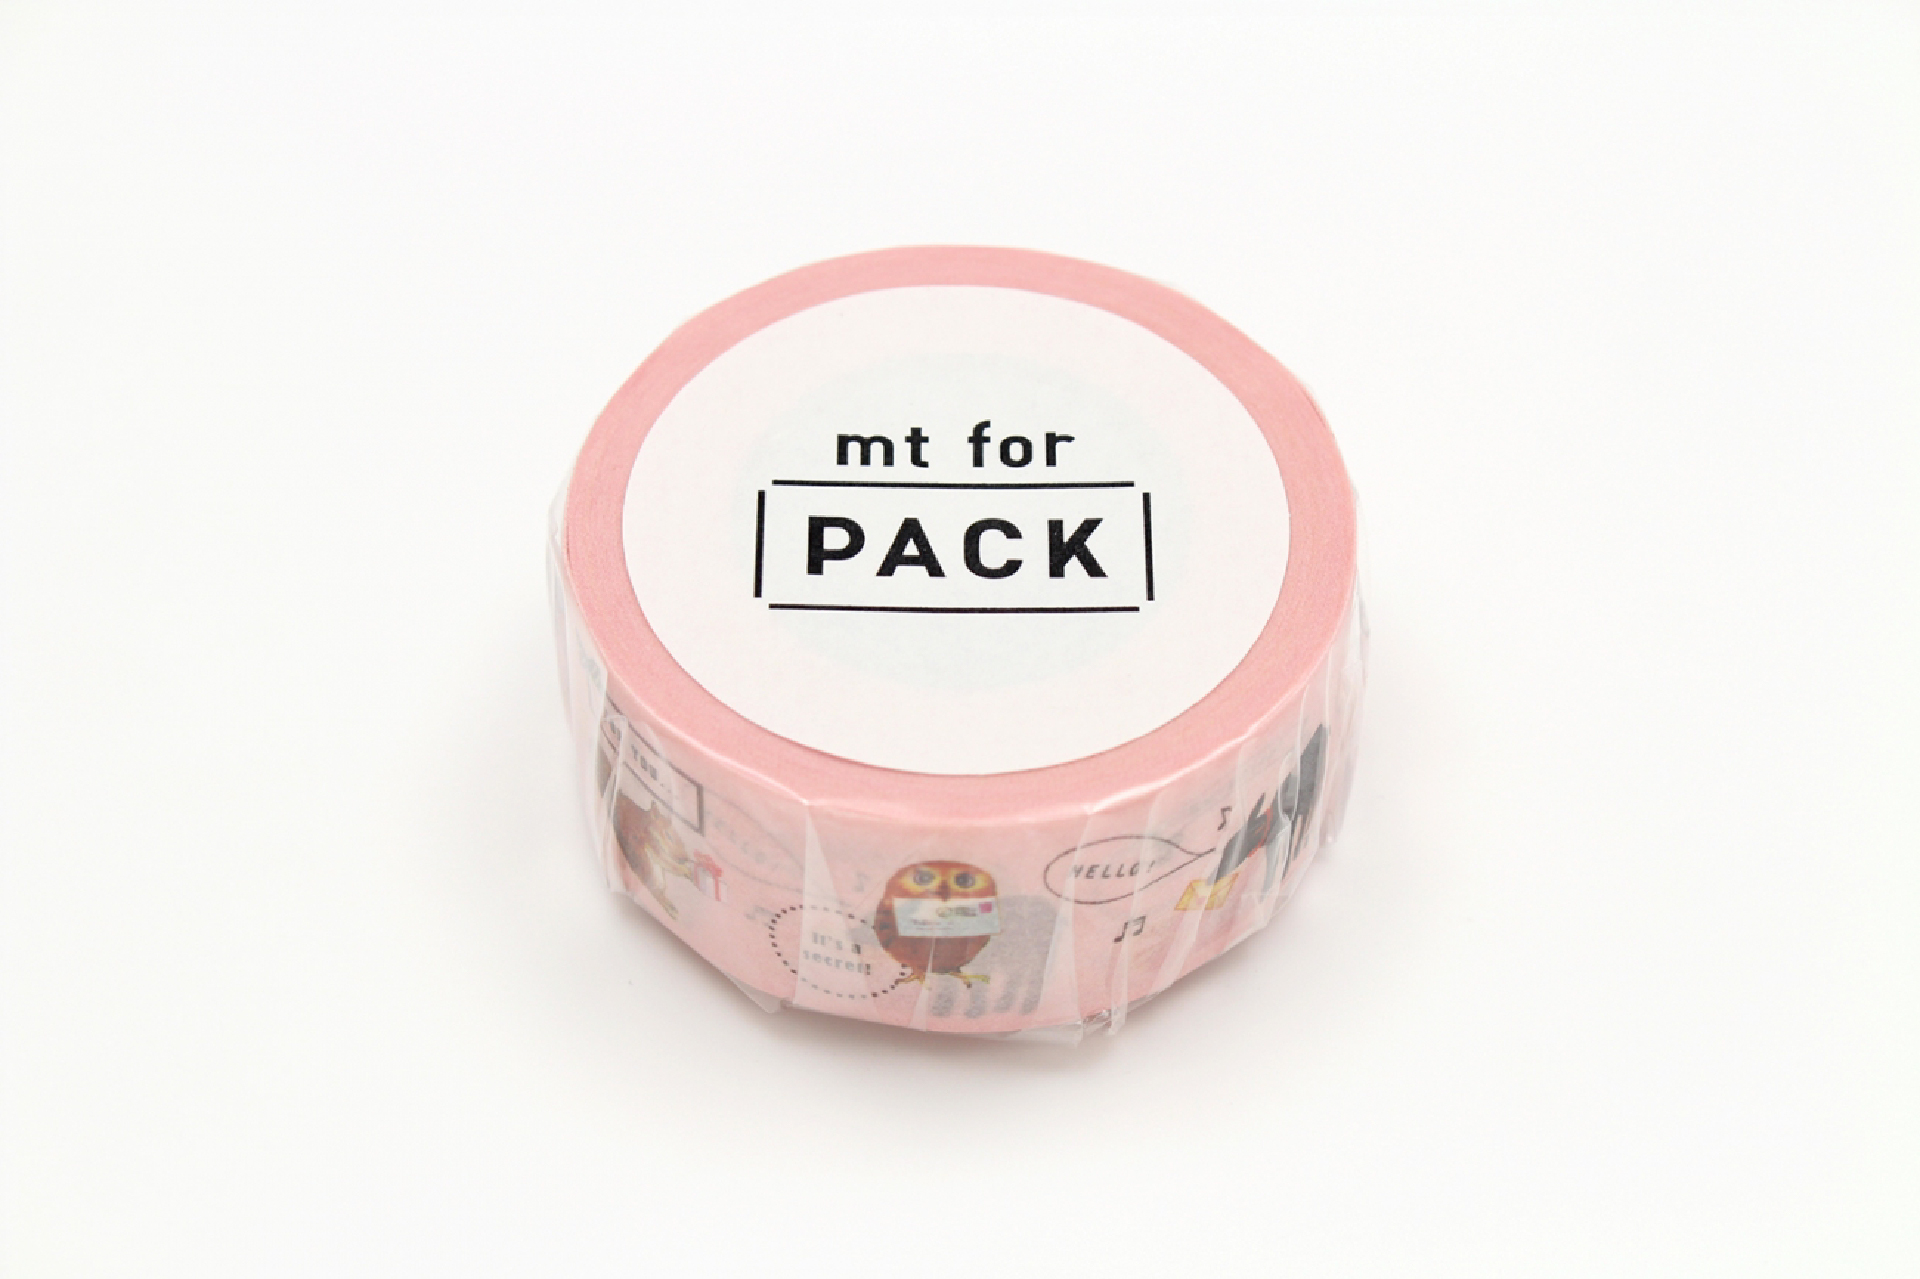 mt for PACK 動物たち | mt mt for PACK | マスキングテープ「mt 